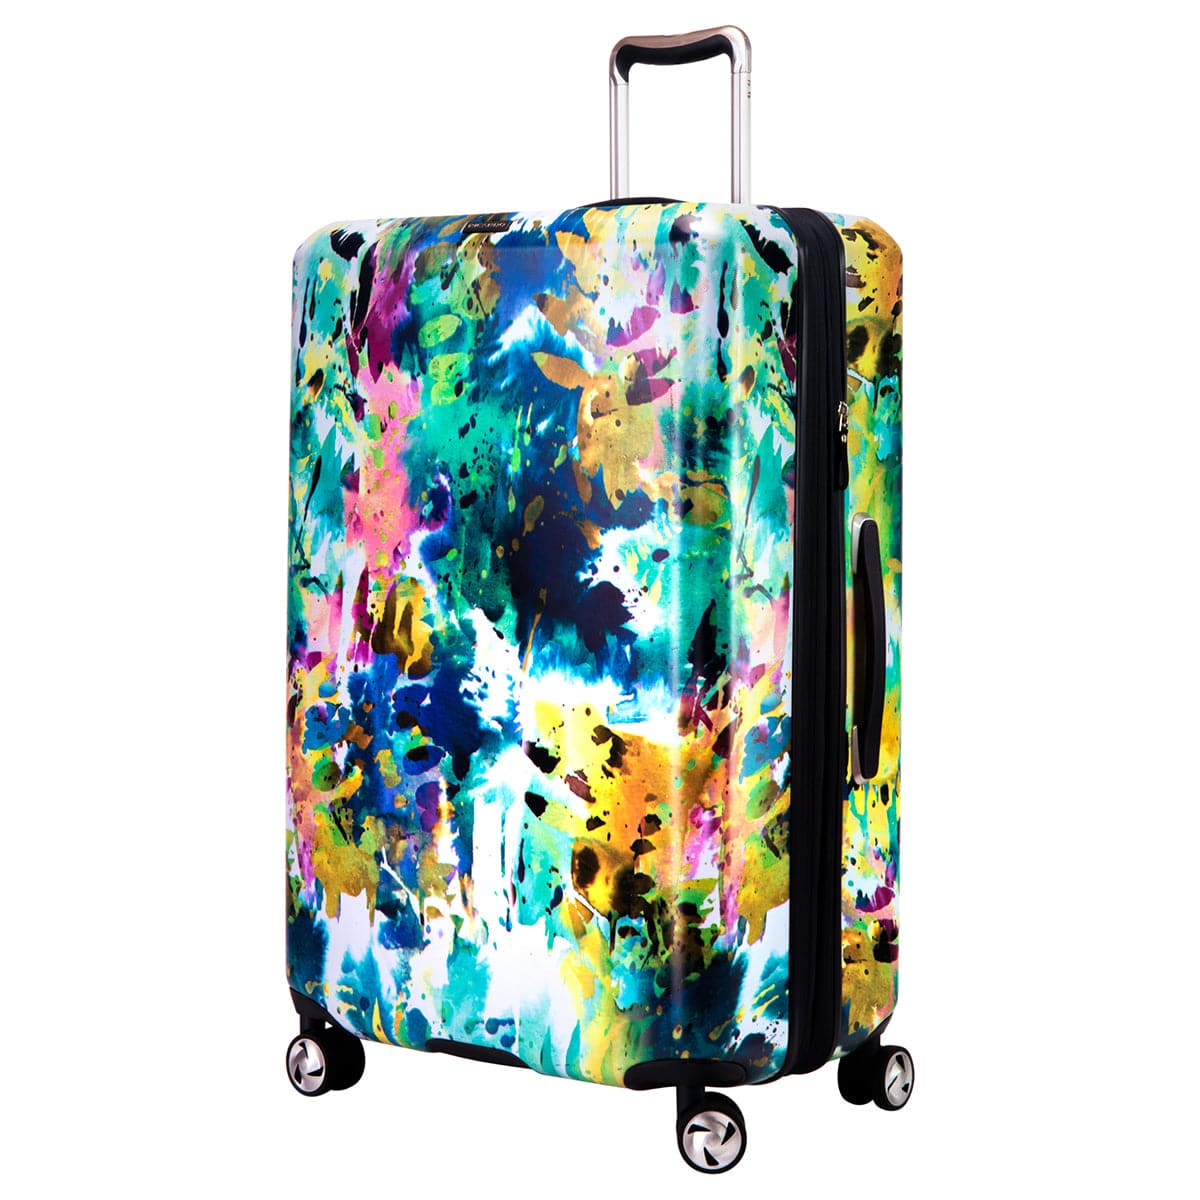 Ricardo Beverly Hills Beaumont Large Check-In Luggage